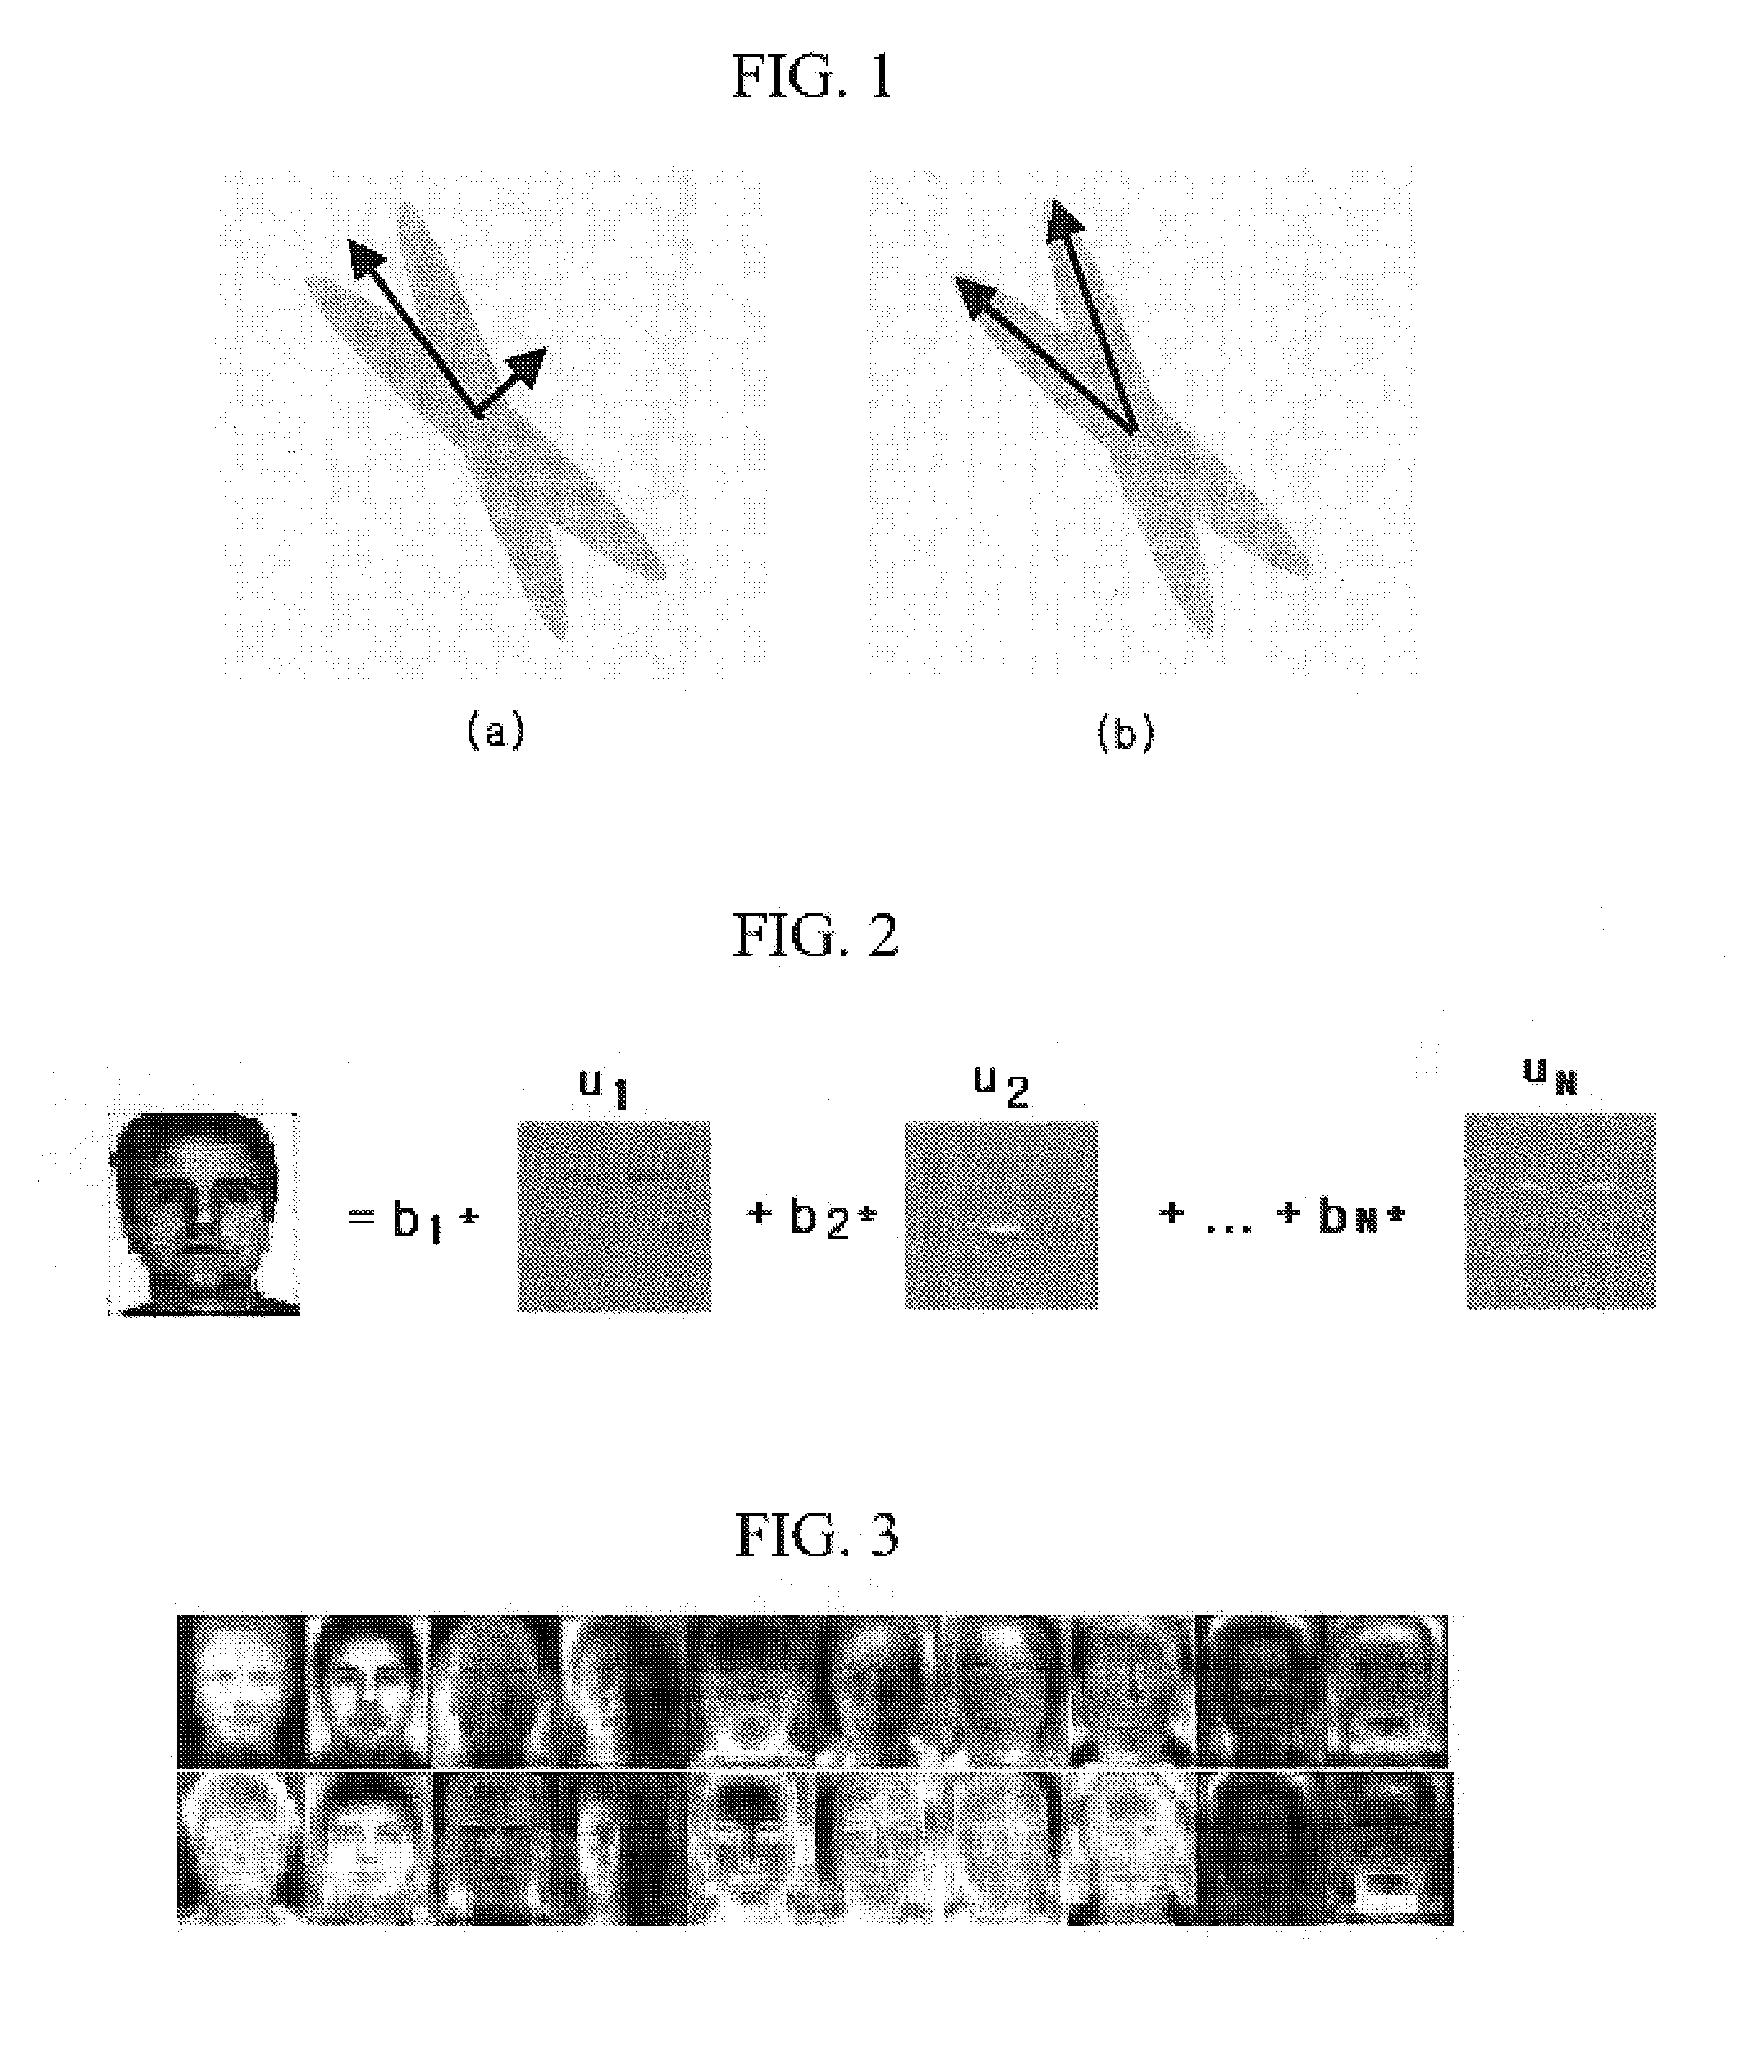 Method and apparatus of recognizing face using component-based 2nd-order principal component analysis (PCA)/independent component analysis (ICA)